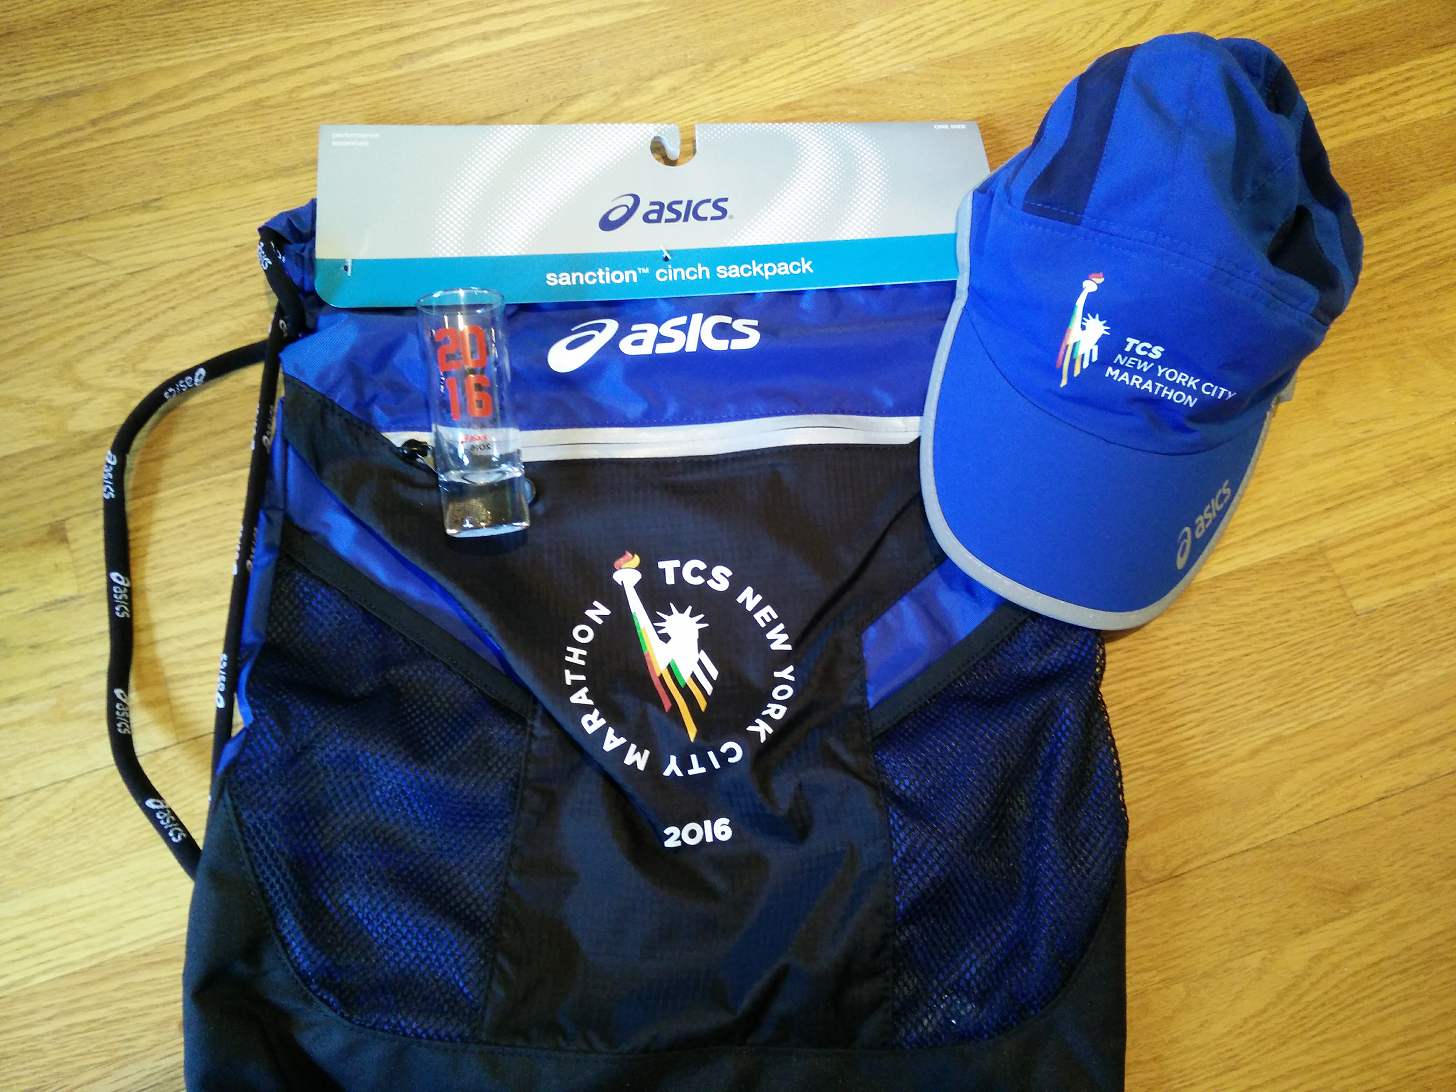 CONTESTS - Like us on Facebook to Win 2016 TCS New York City Marathon Gear!